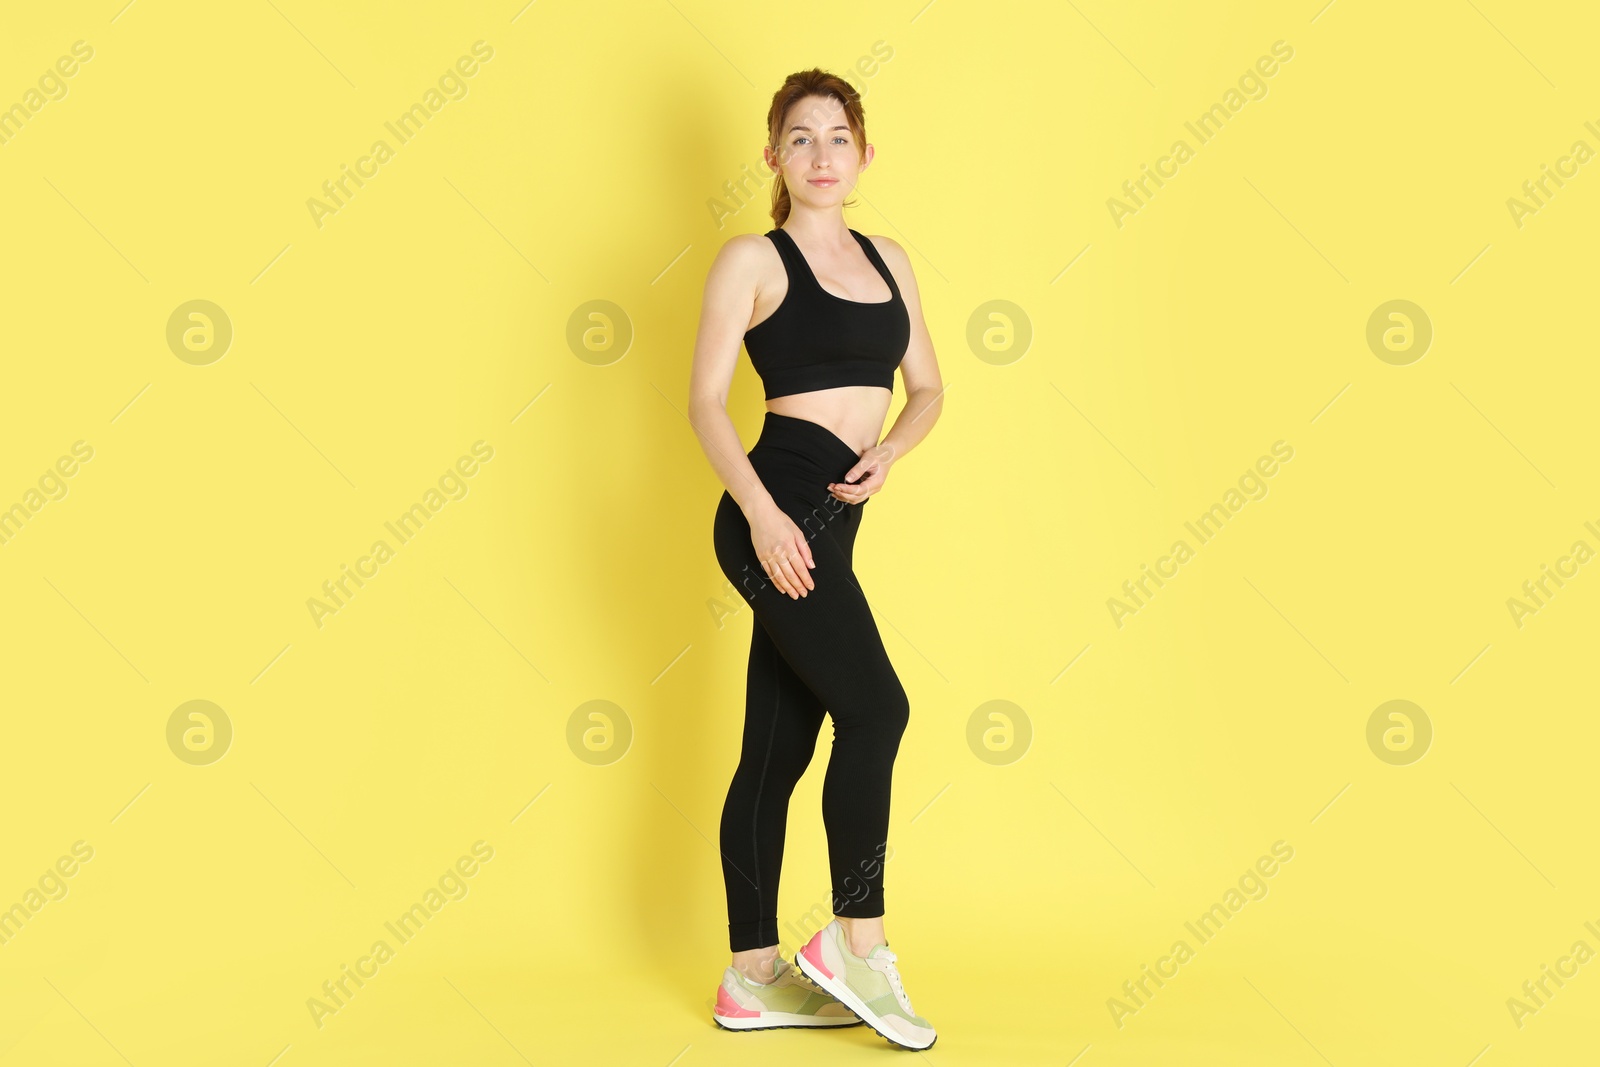 Photo of Woman with slim body posing on yellow background